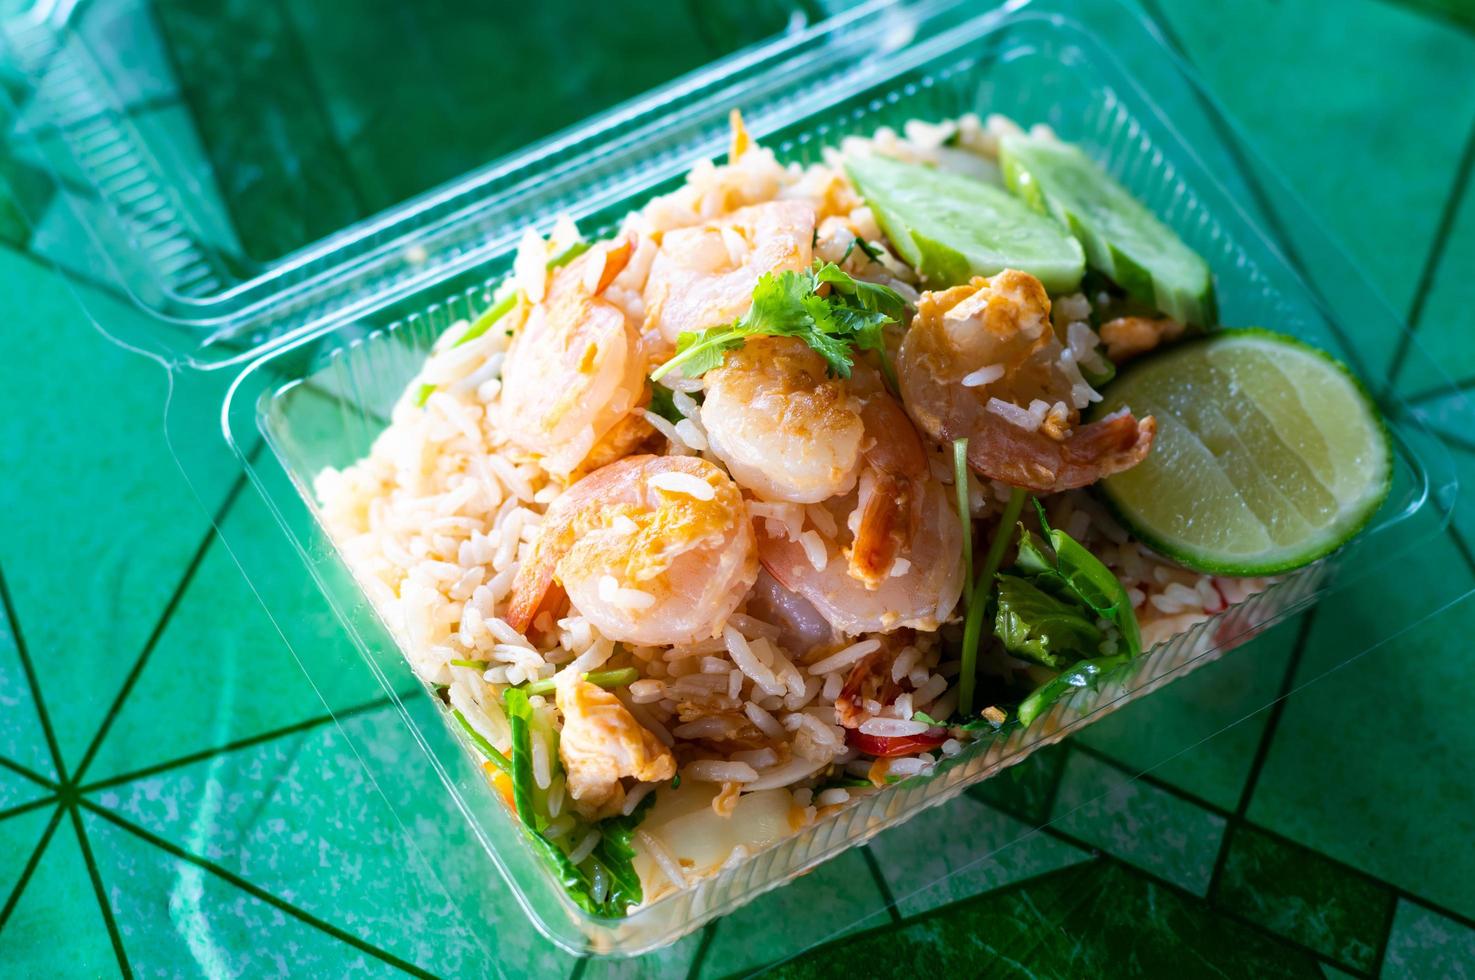 Fried rice topped with shrimp in a plastic box. photo